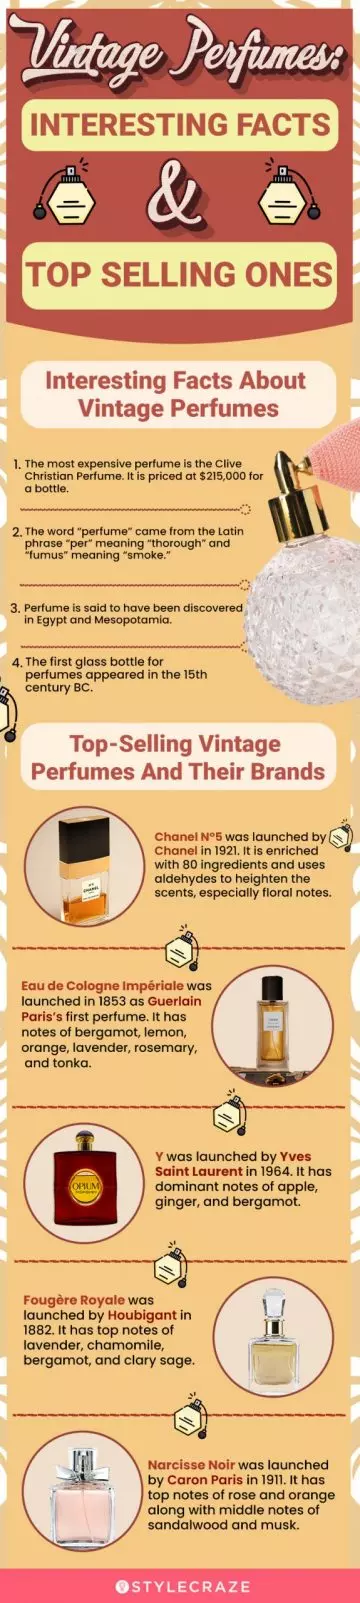 Vintage Perfumes: Interesting Facts & Top Selling (infographic)